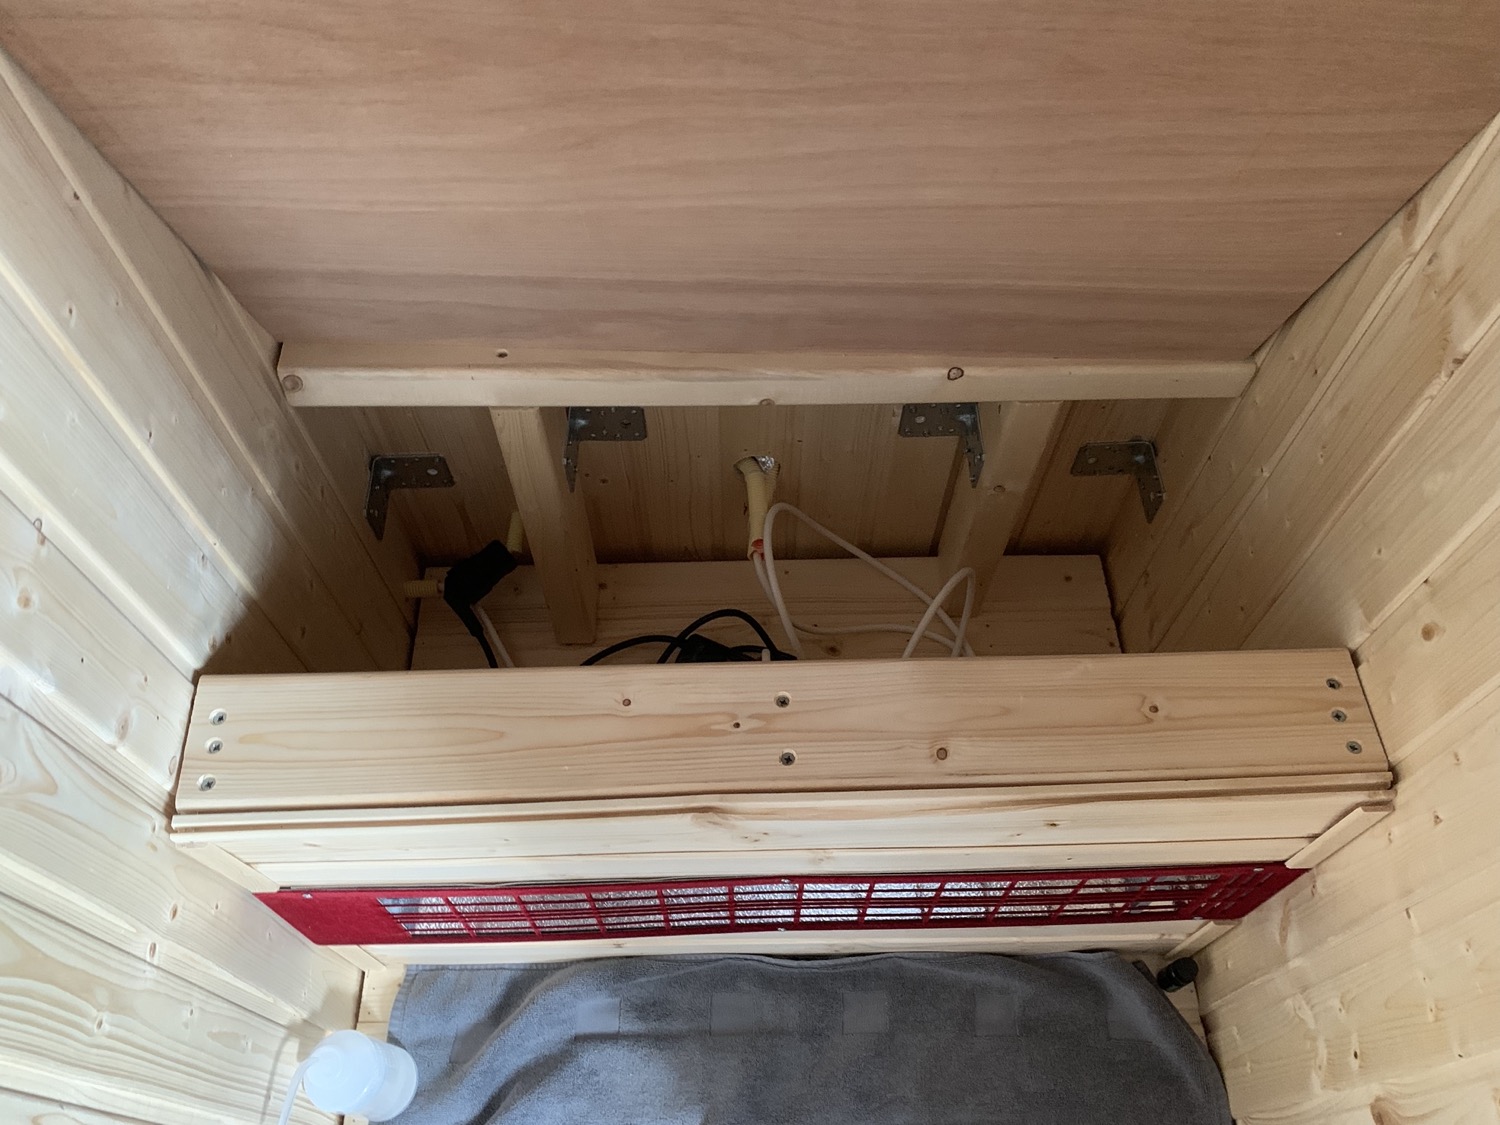 The top part of the bench lifts up. The space under the bench hides the electrical wiring: one plug per heater + an extension cord. Power comes in via a hole in the back wall.